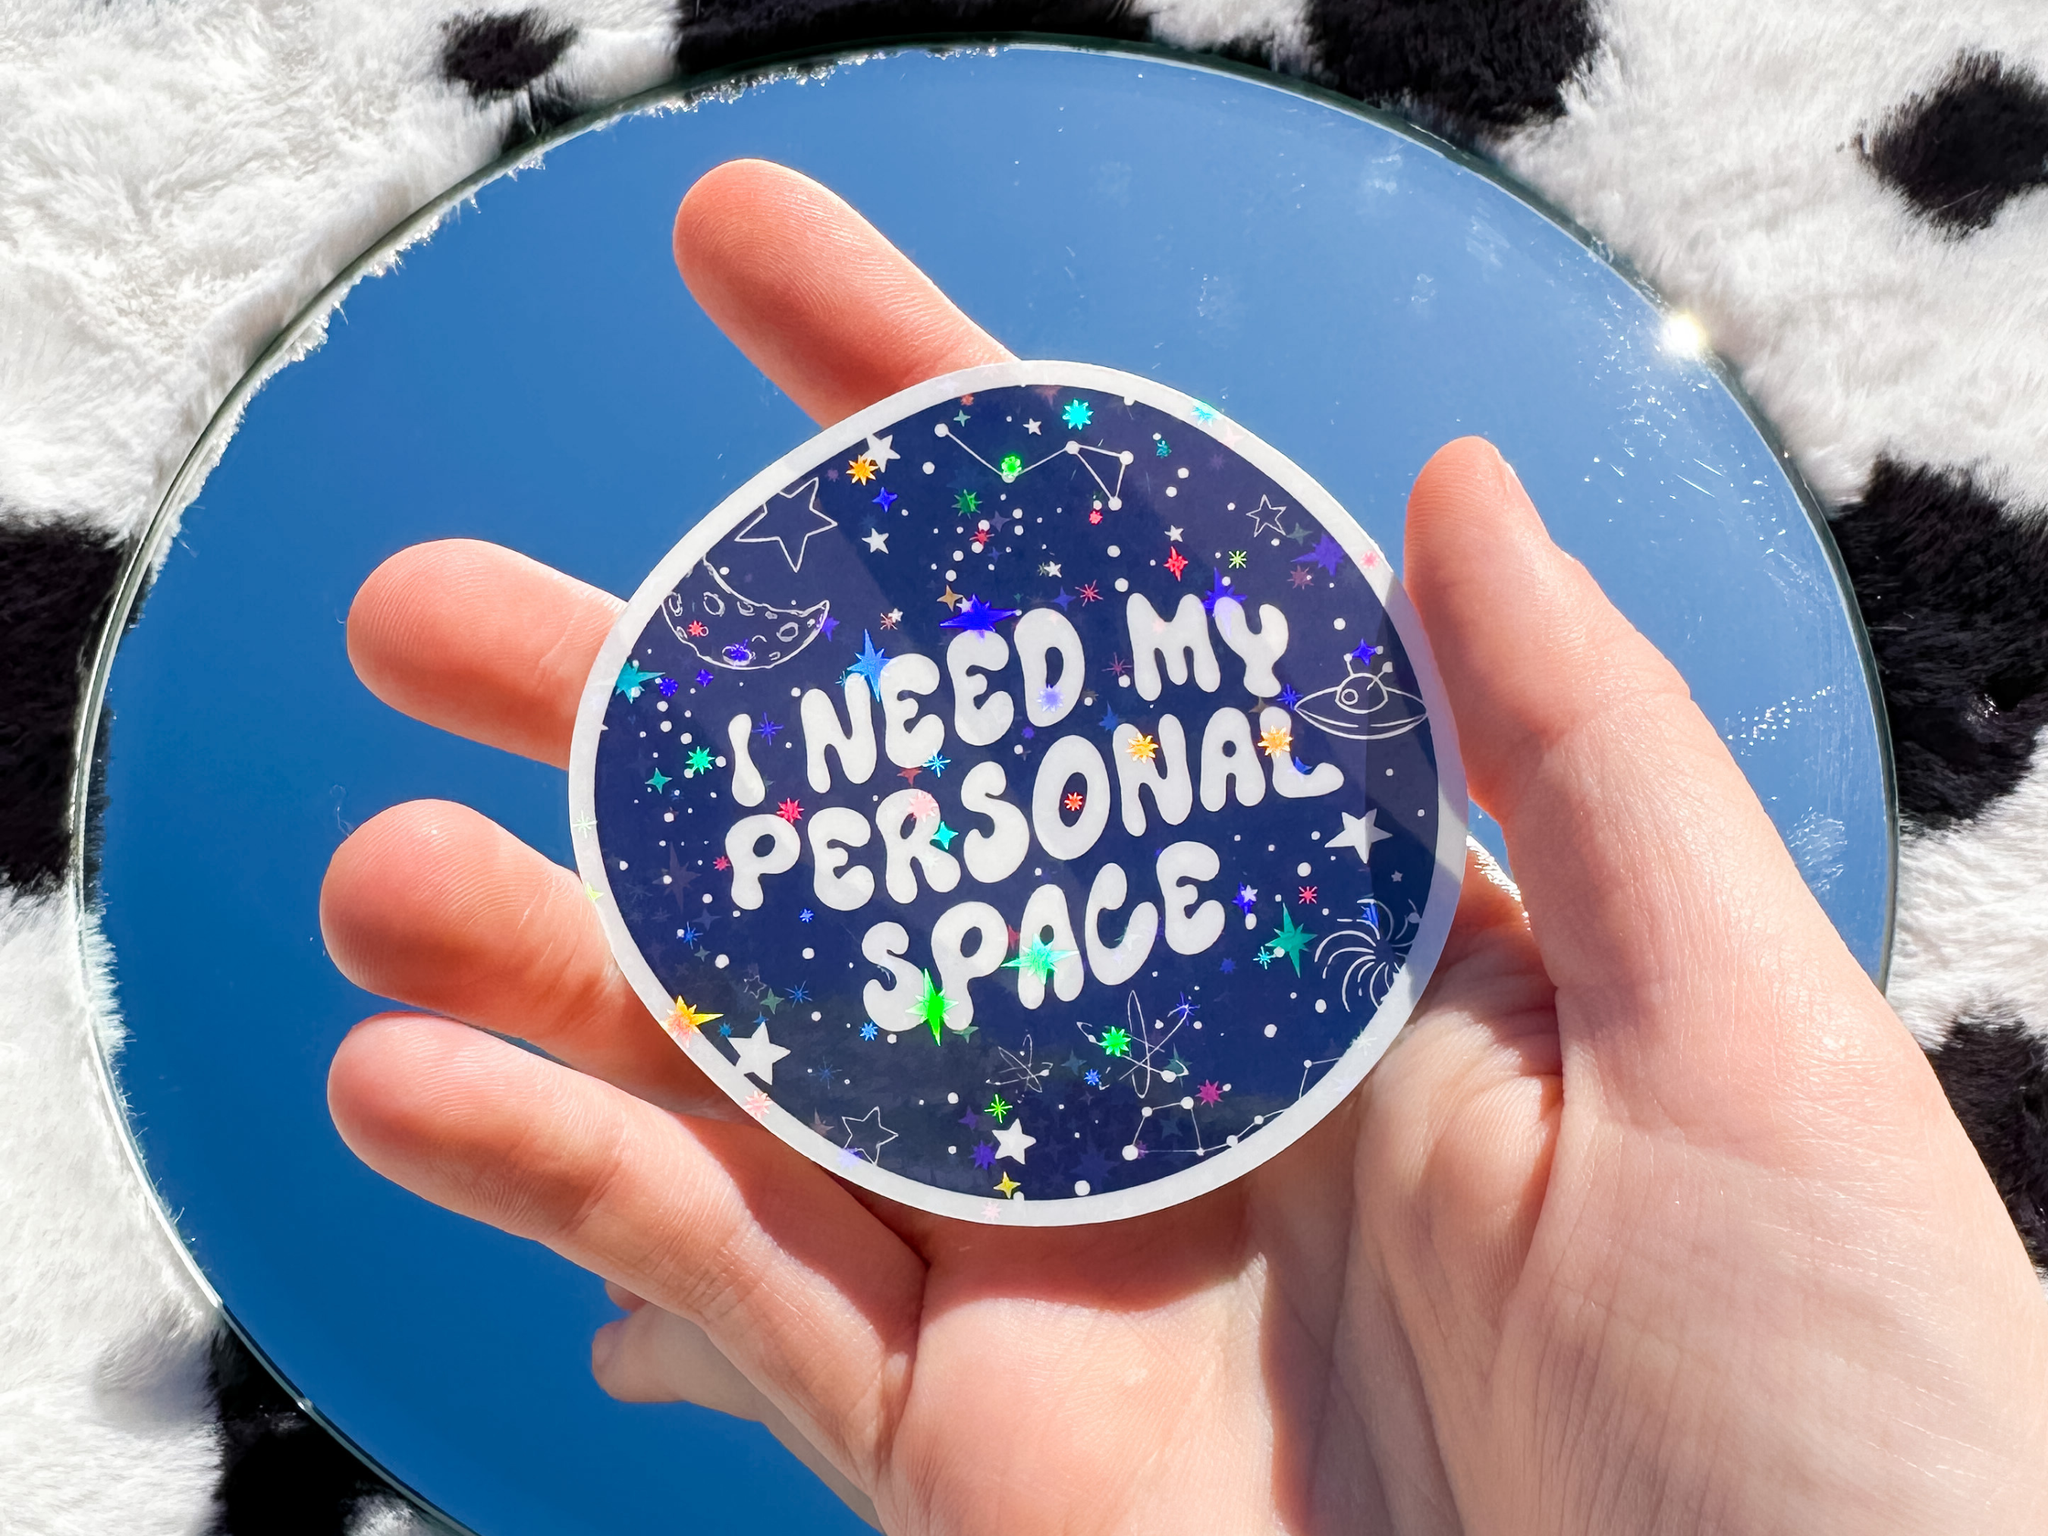 "I Need My Personal Space" Holographic Sticker